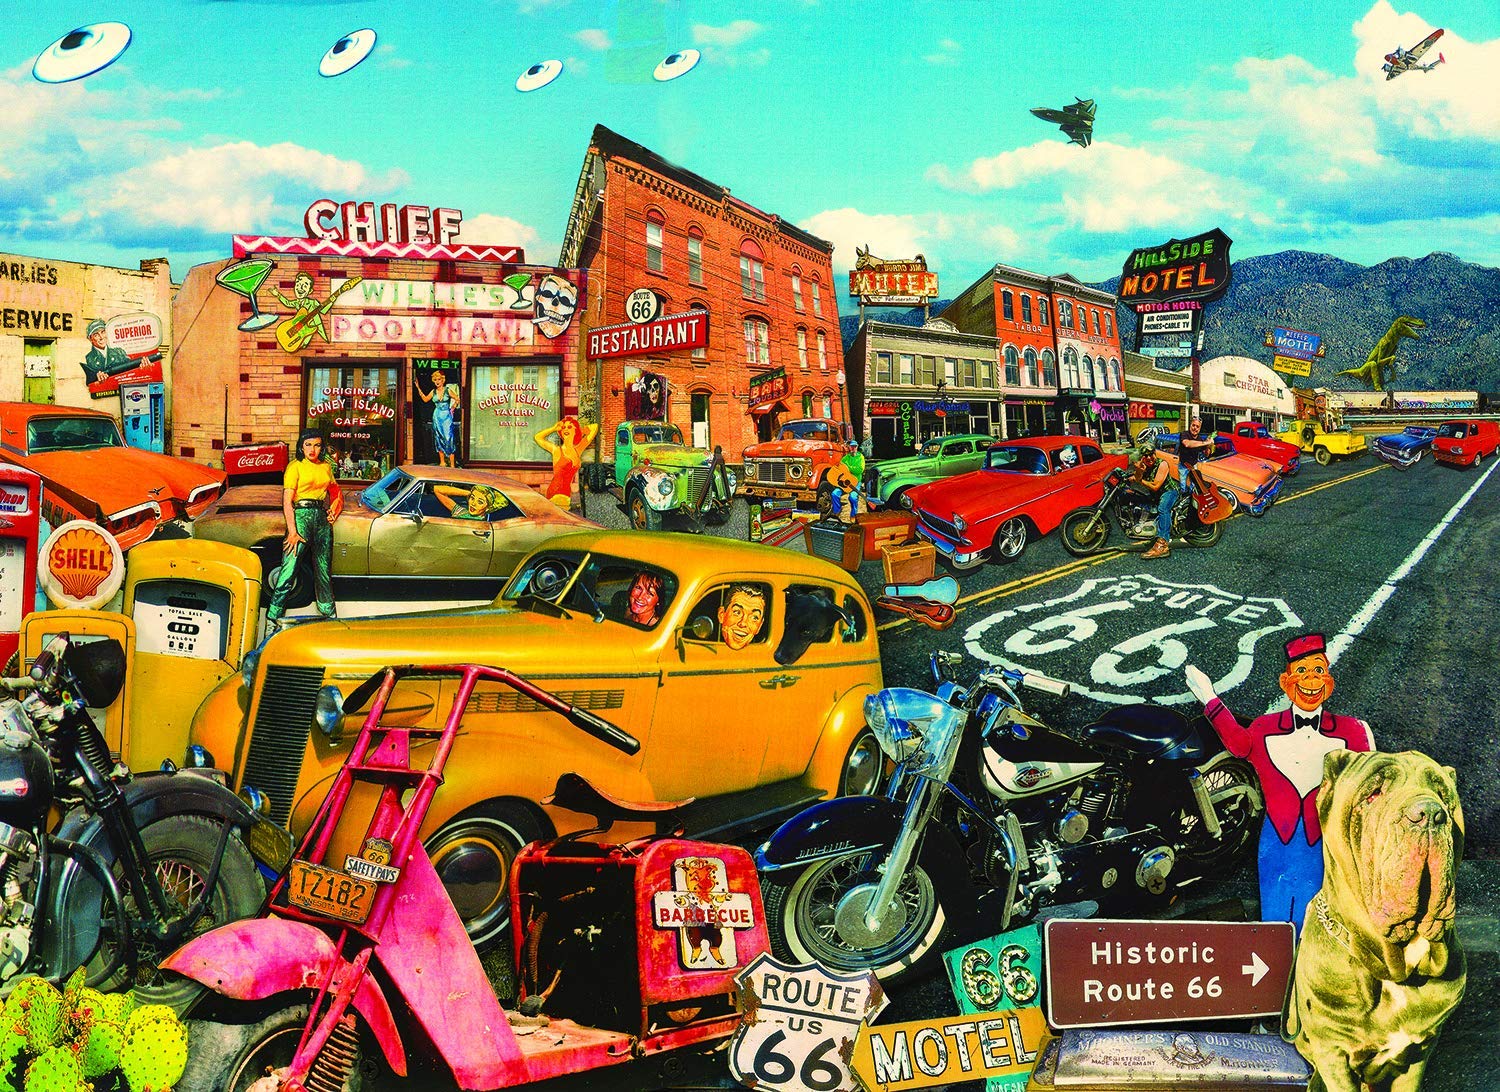 SUNSOUT INC - Willie's Pool Hall - 500 pc Large Pieces Jigsaw Puzzle by Artist: John Roy - Finished Size 19.25